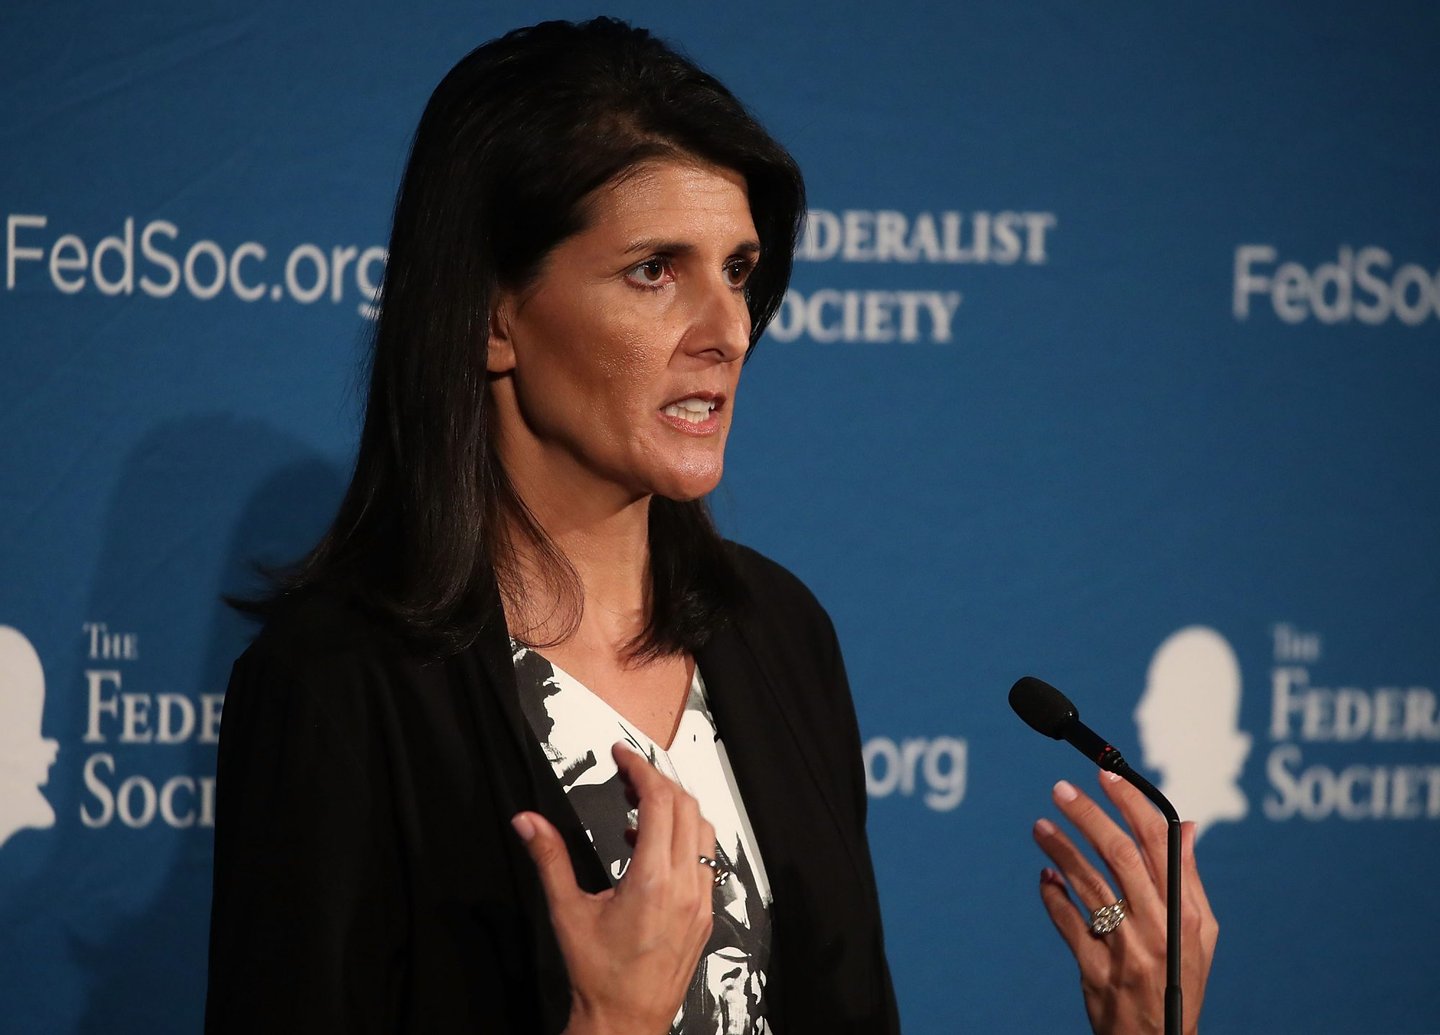 WASHINGTON, DC - NOVEMBER 18: South Carolina Gov. Nikki Haley speaks at the Federalist Society, 2016 National Lawyers Convention at the Mayflower Hotel, on November 18, 2016 in Washington, DC. Haley met with President-elect Donald Trump to possibly being considered for a spot in his administration. (Photo by Mark Wilson/Getty Images)